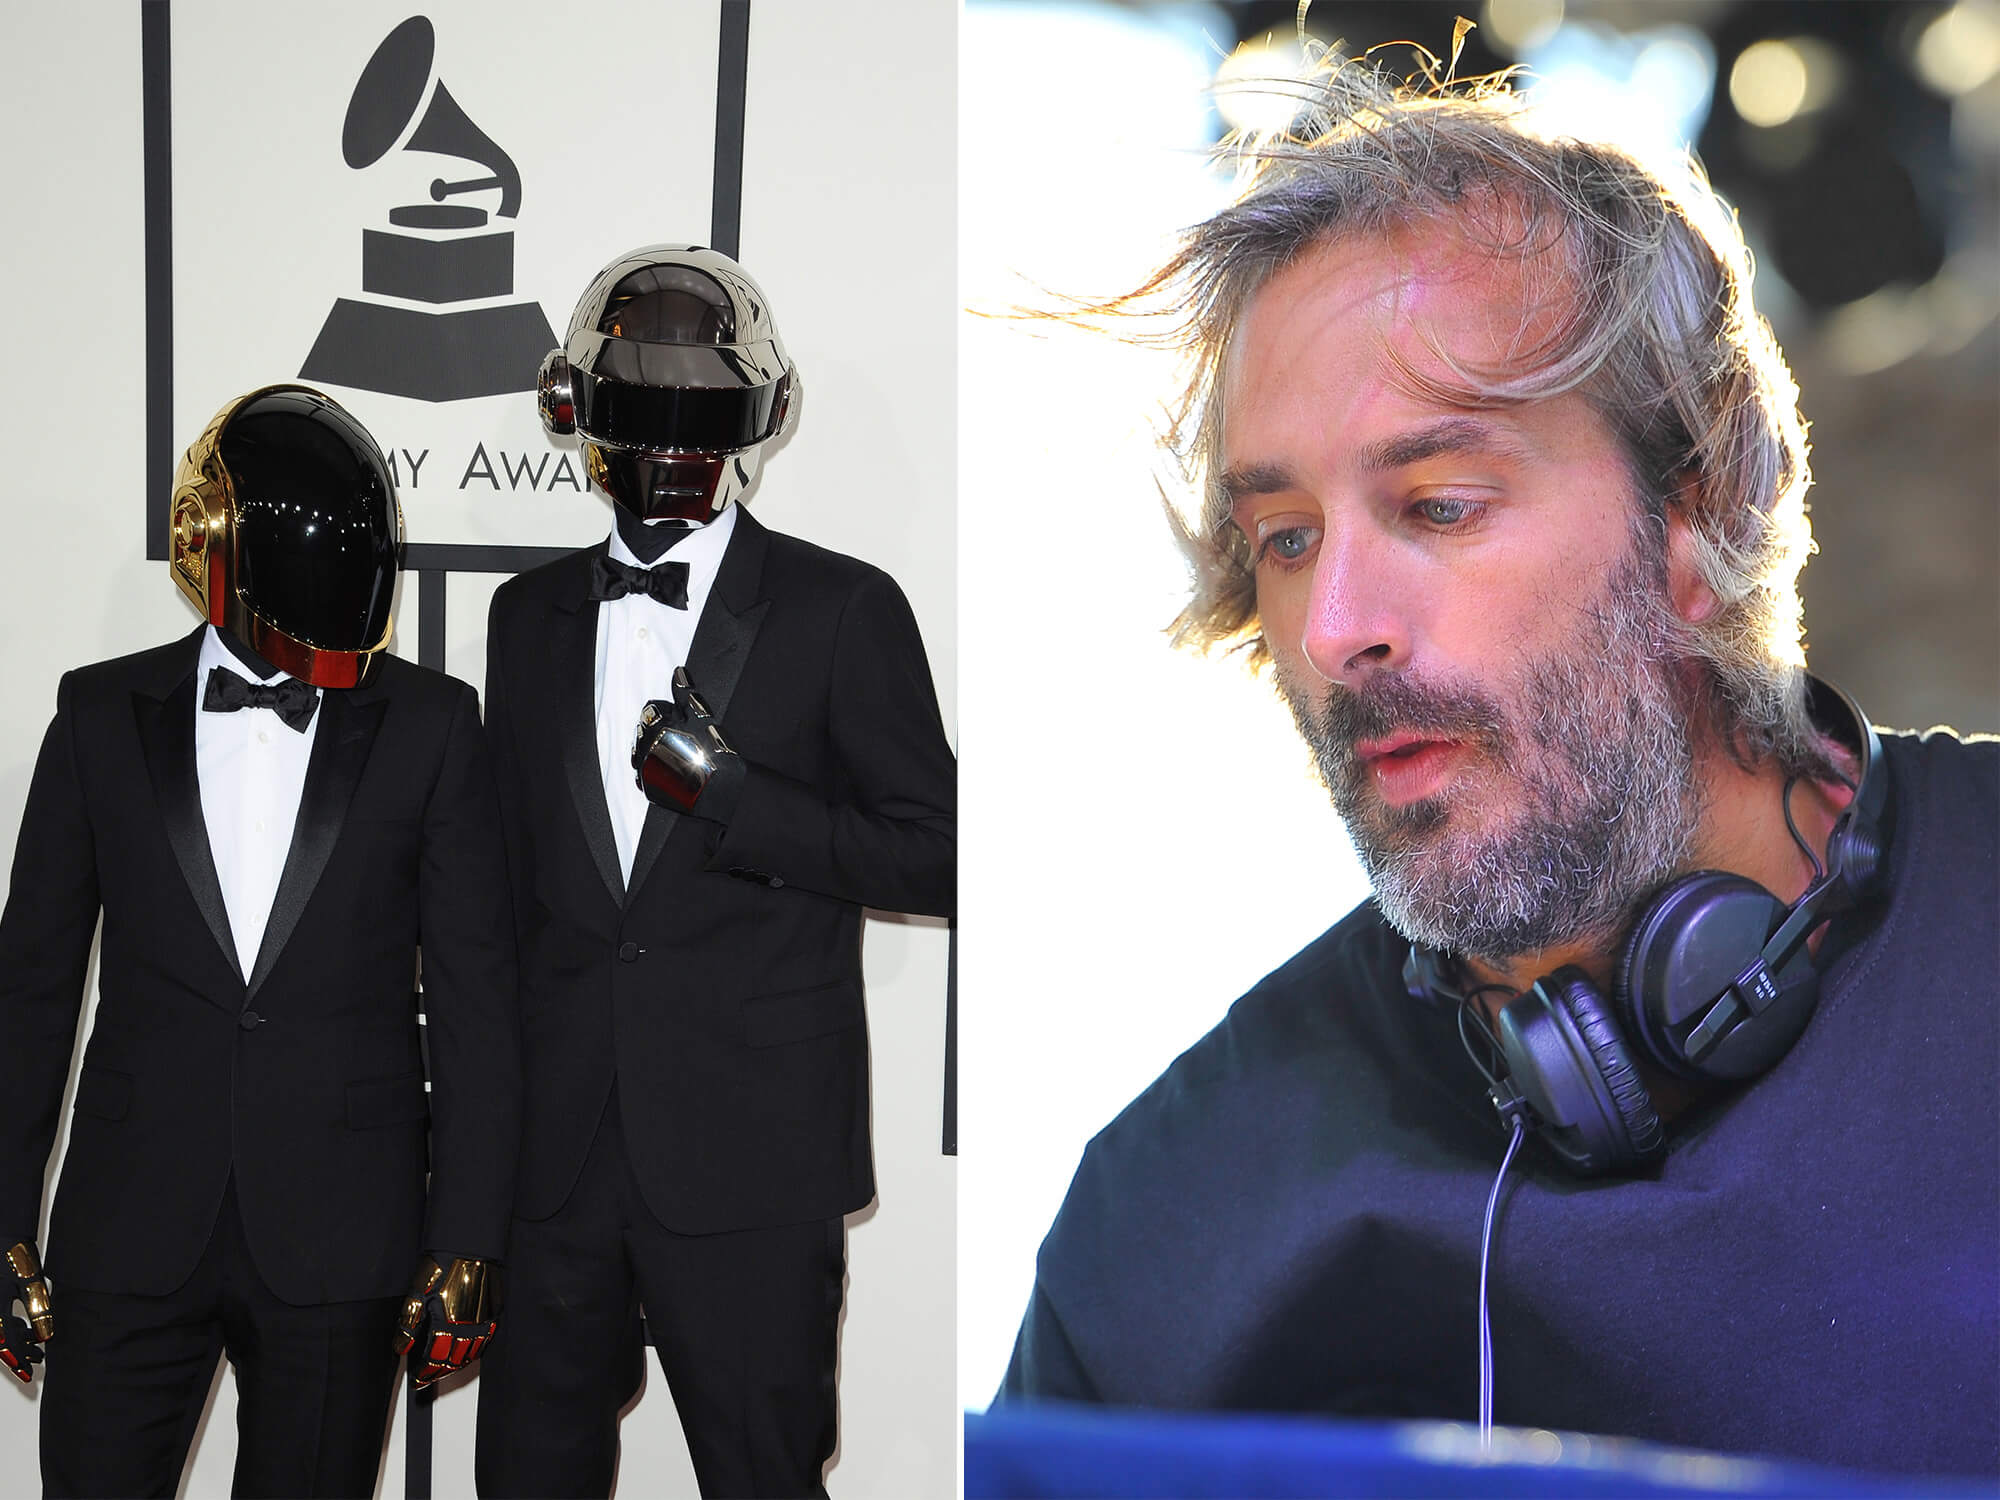 Daft punk pictured at the Grammy's in their signature helmets (Left), and DJ Falcon wearing headphones and looking down as he plays a set (Right)